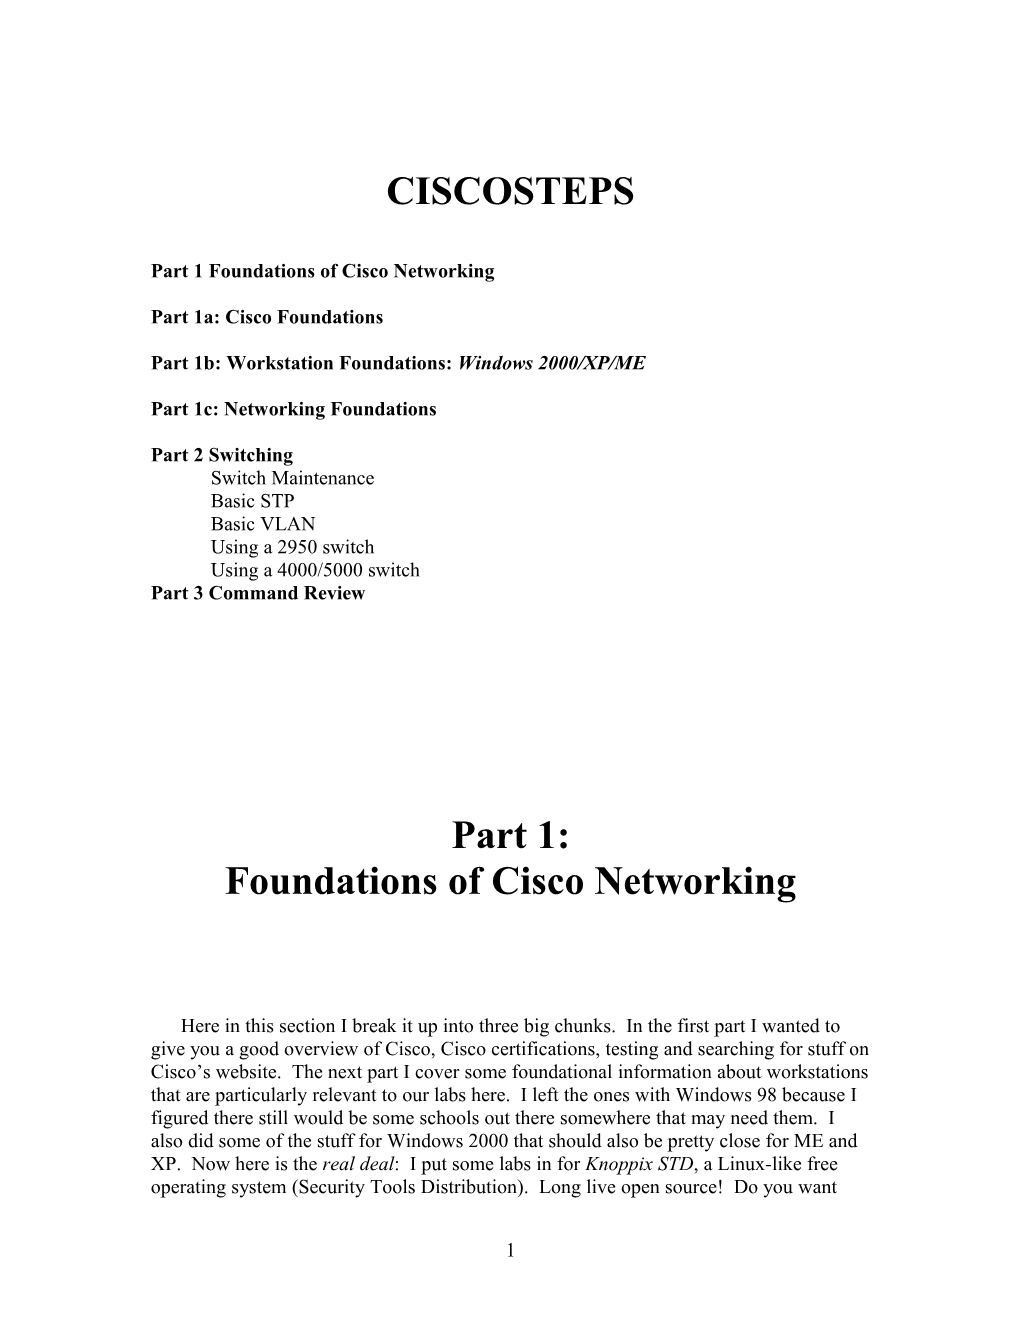 Part 1 Foundations of Cisco Networking